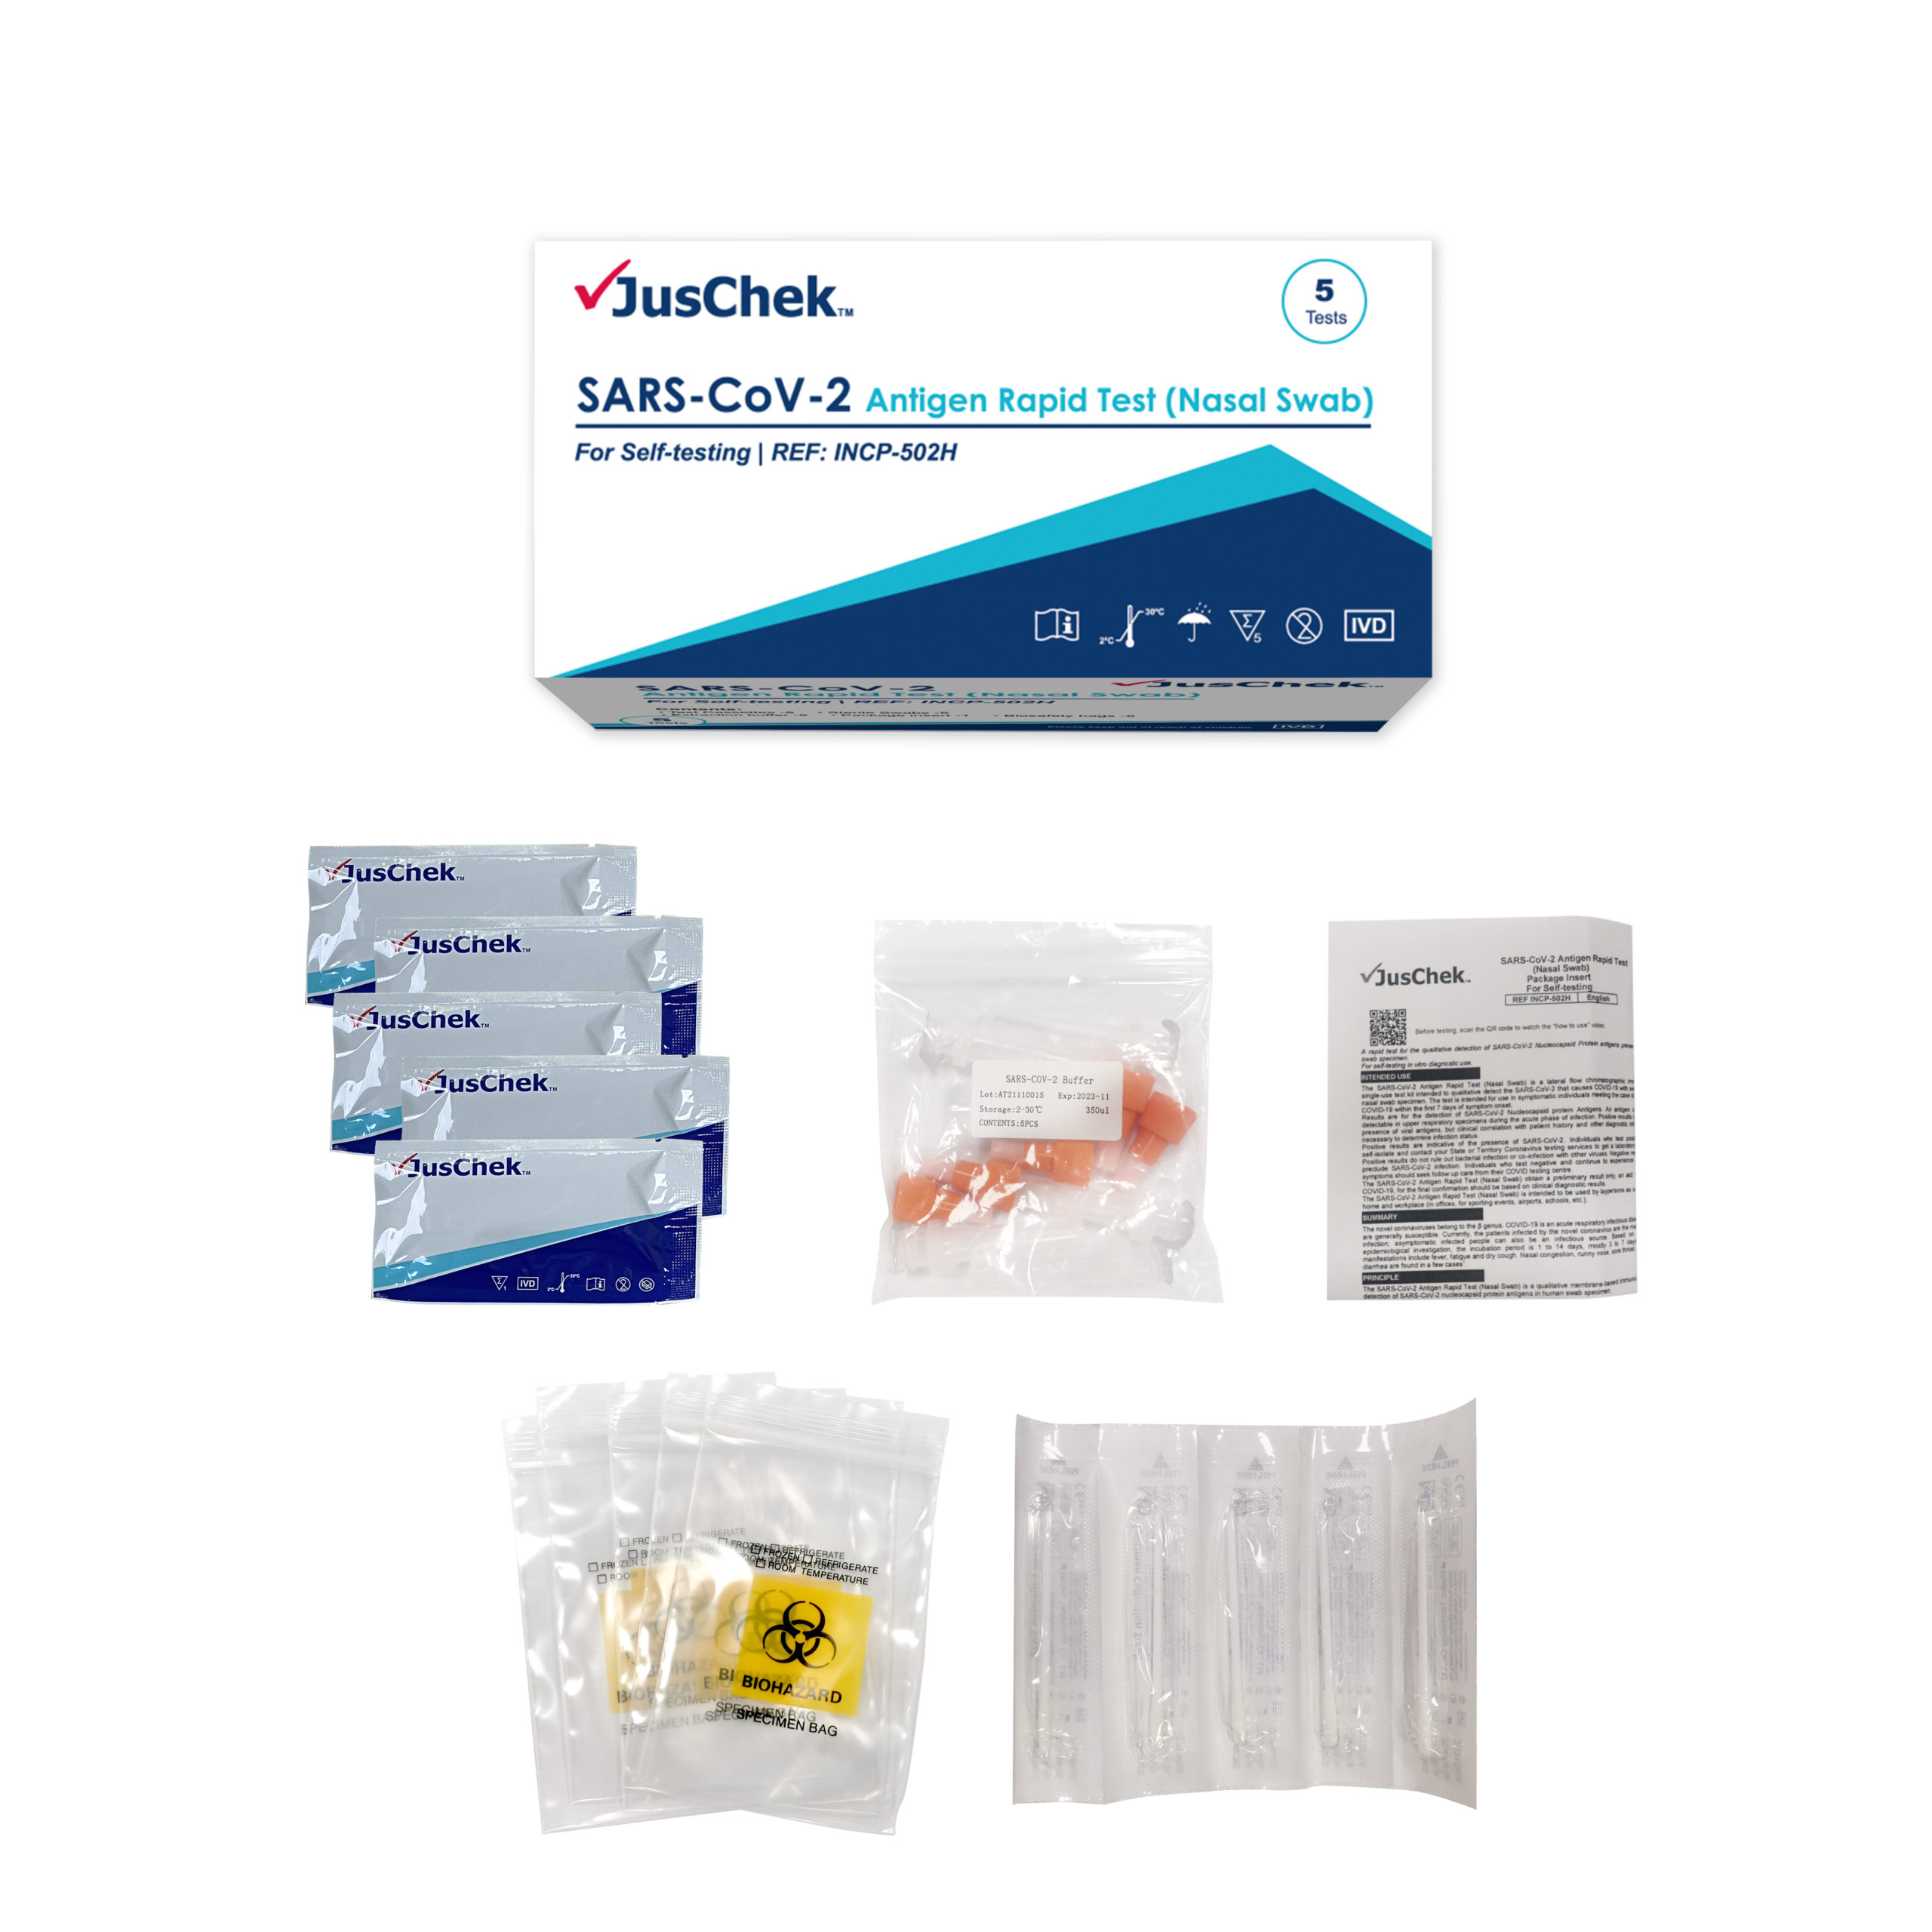 Product of covid rapid test kit, all the content has been displayed